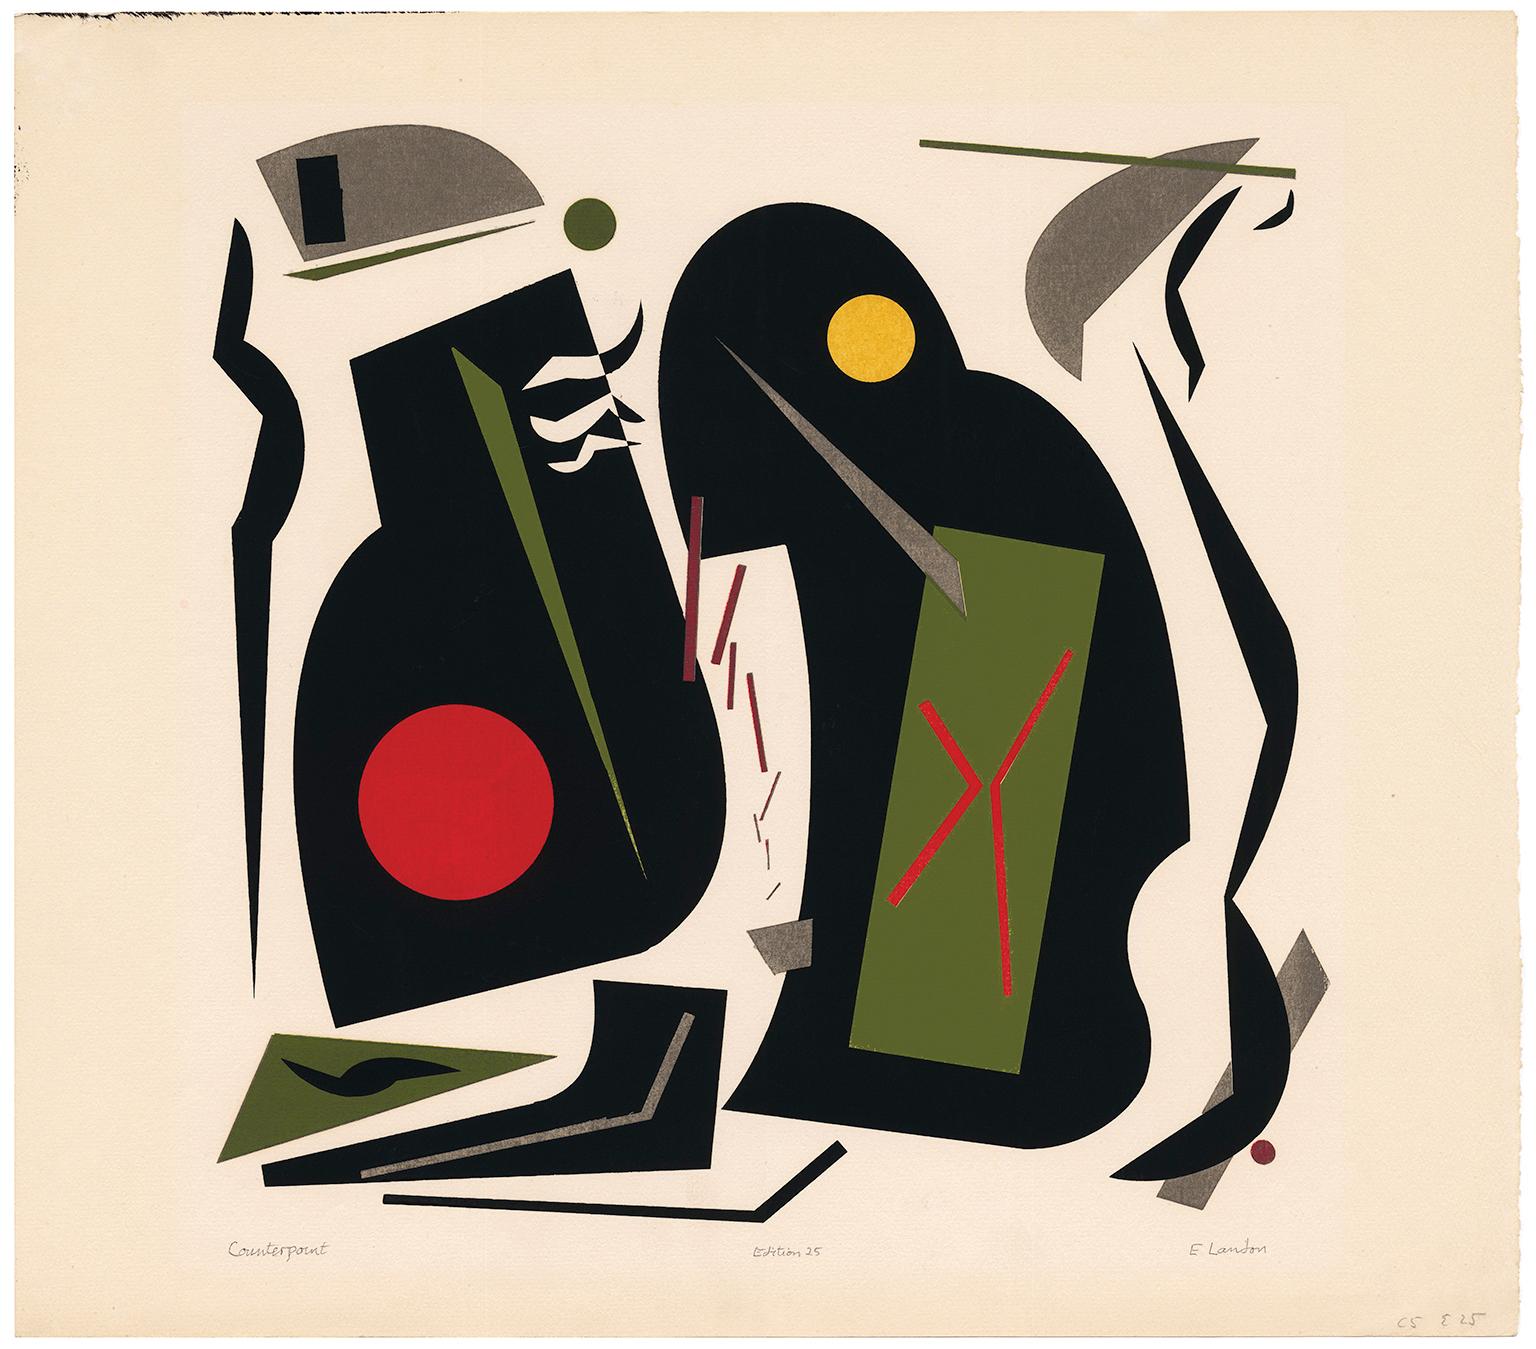 'Counterpoint' — Modernist Abstraction, 1940s  - Print by Edward August Landon